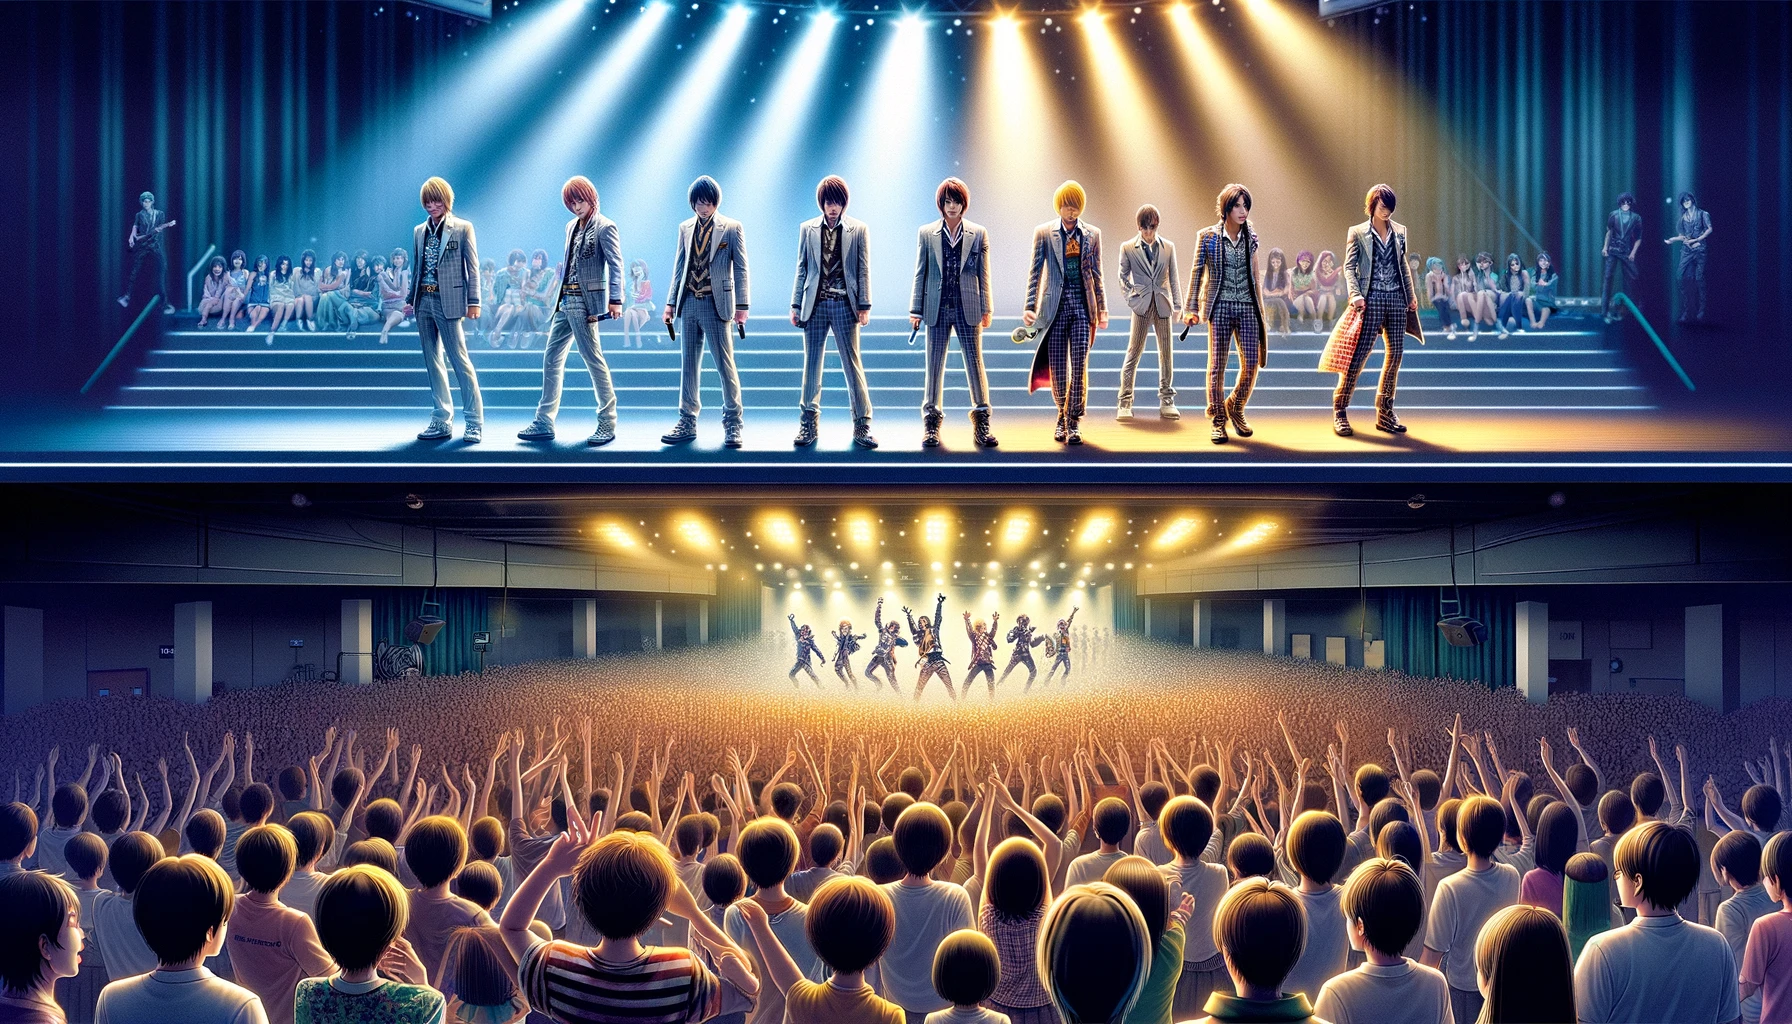 An image showing a reversal in popularity between two Japanese male idol groups that debuted at the same time. The scene is divided: on the left, the initially less popular group now performs on a large, packed stage with bright lights and enthusiastic fans. They are dressed in flashy, modern outfits. On the right, the group that was initially more popular is now performing in a smaller, sparsely attended venue with muted lighting and simple stage decor. The contrast illustrates the dramatic change in their fortunes.